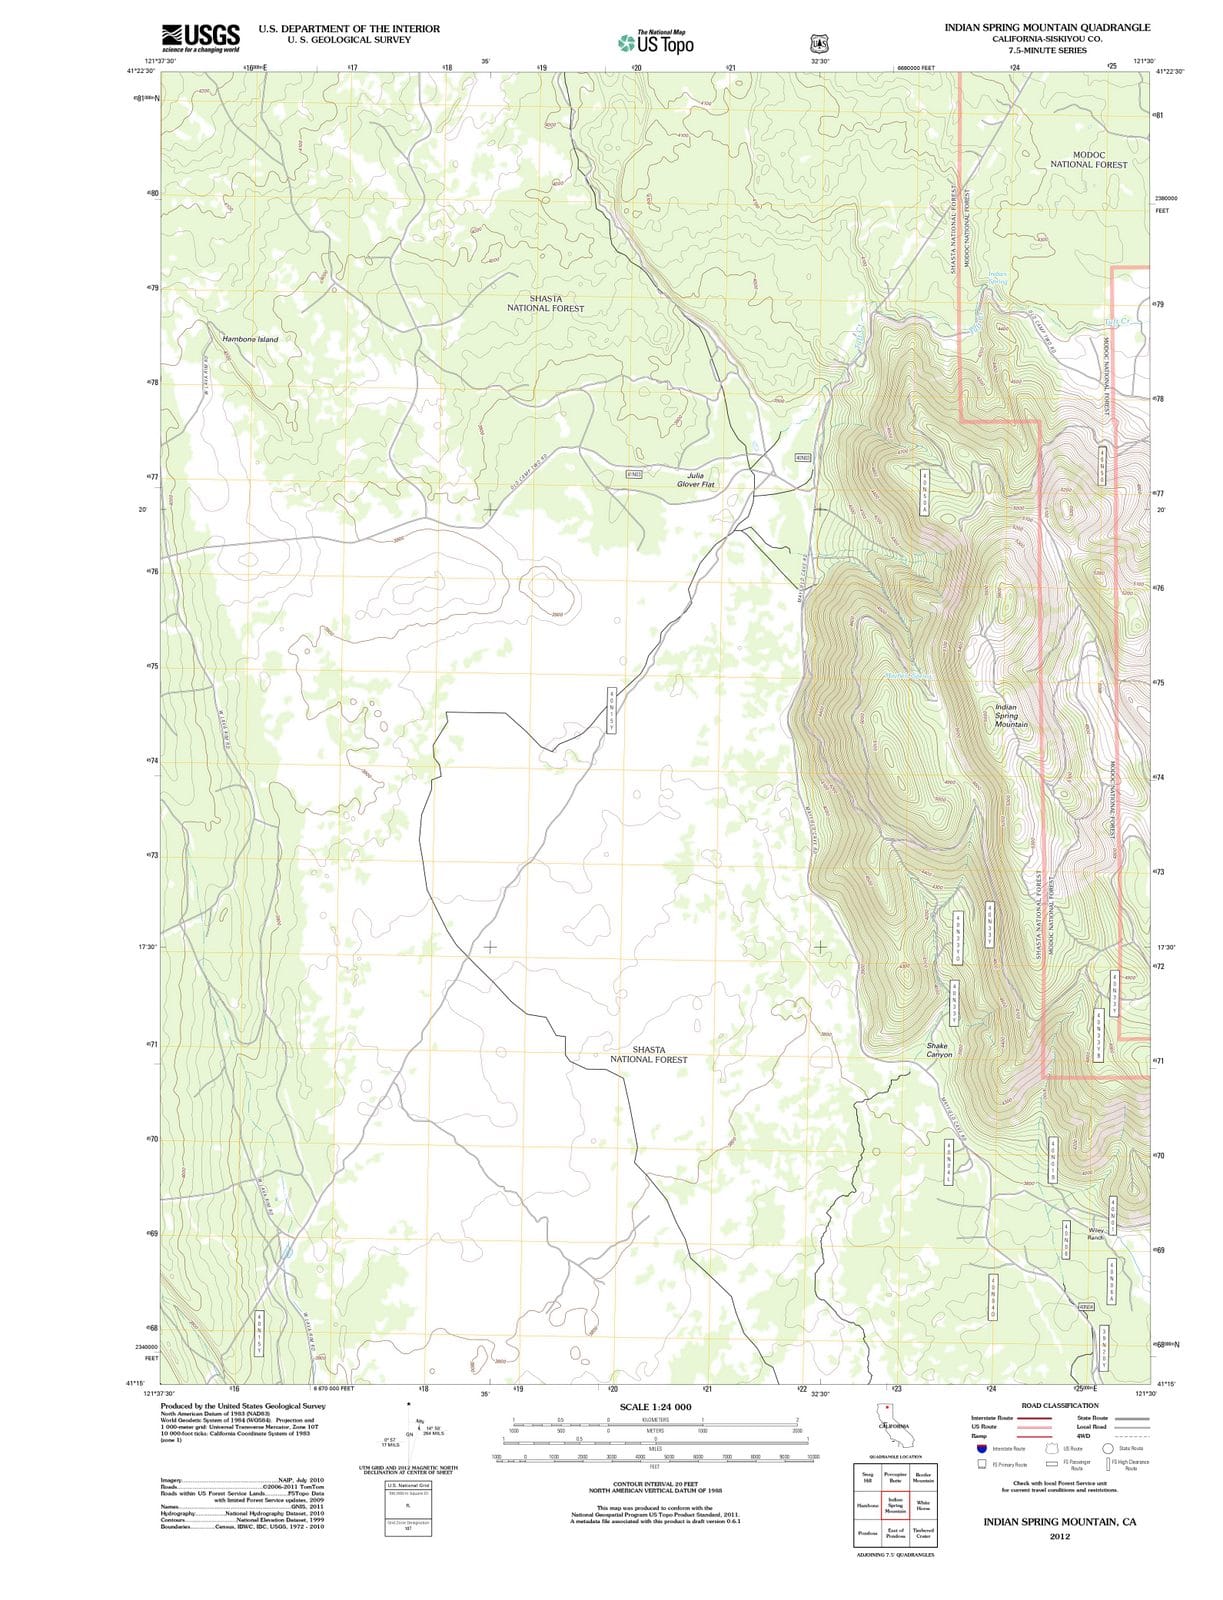 2012 Indian Spring Mountain, CA - California - USGS Topographic Map